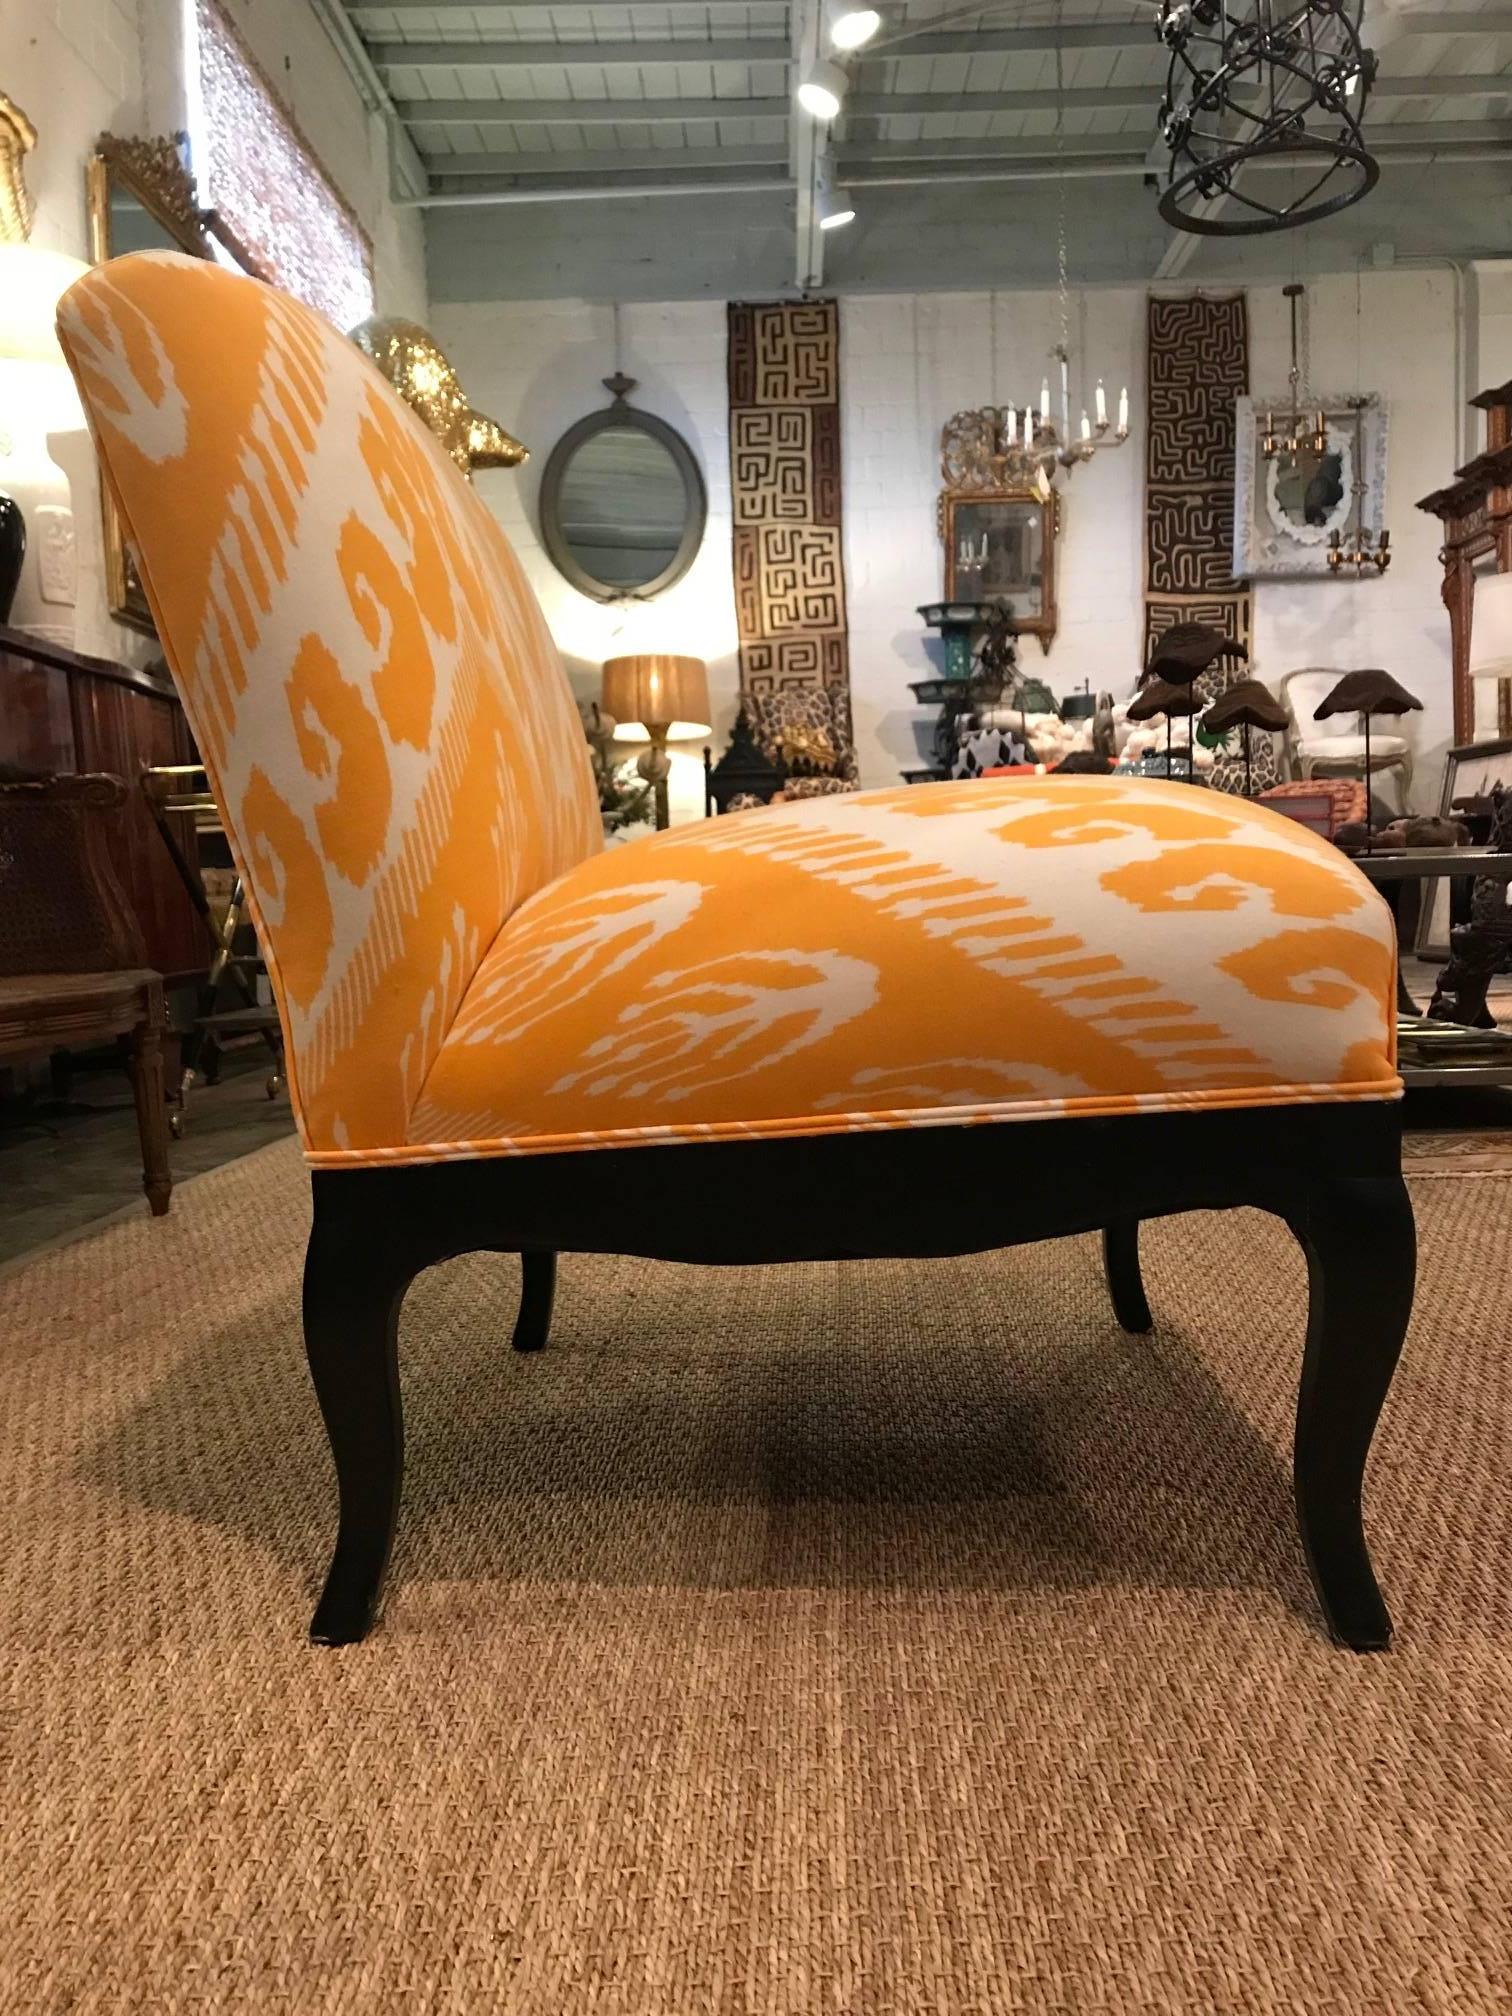 Slipper chair in Saffron Ikat fabric designed by Michelle Nussbaumer 
Welt trim
Black painted curved legs and curved side and front rails.